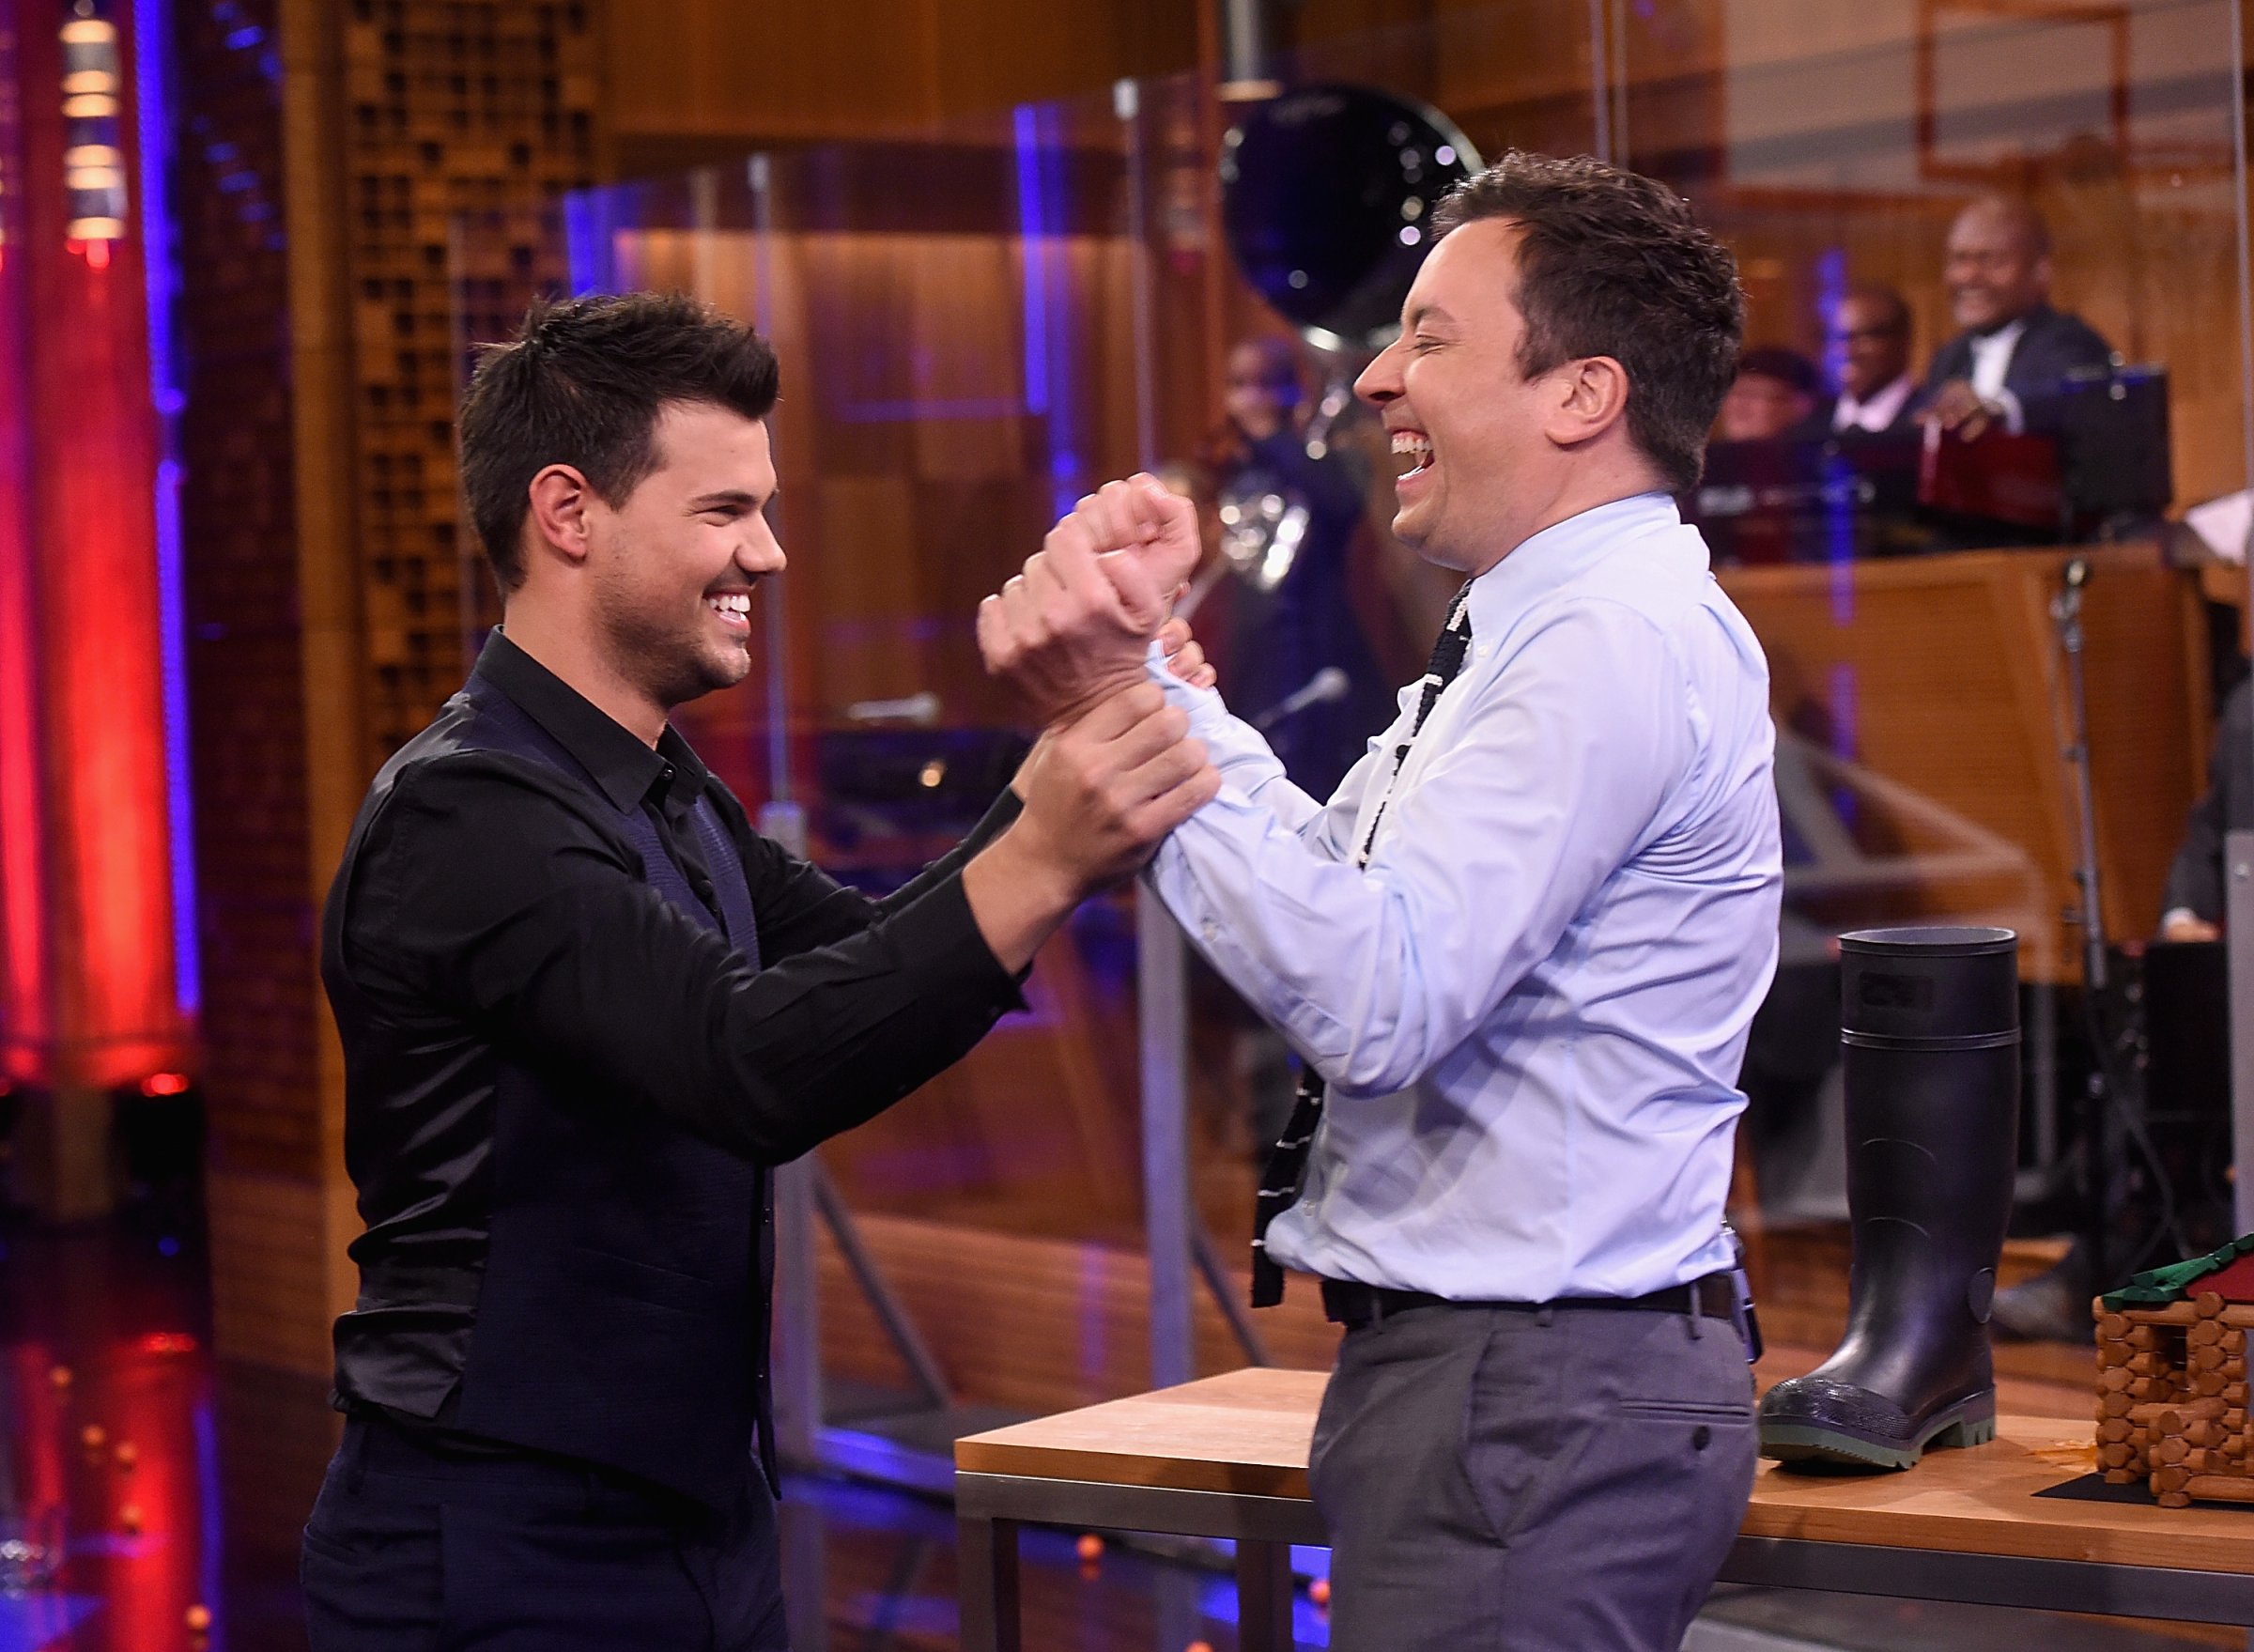 Taylor Lautner and host Jimmy Fallon during a segment on "The Tonight Show Starring Jimmy Fallon" at NBC Studios on March 31, 2016 in New York City.